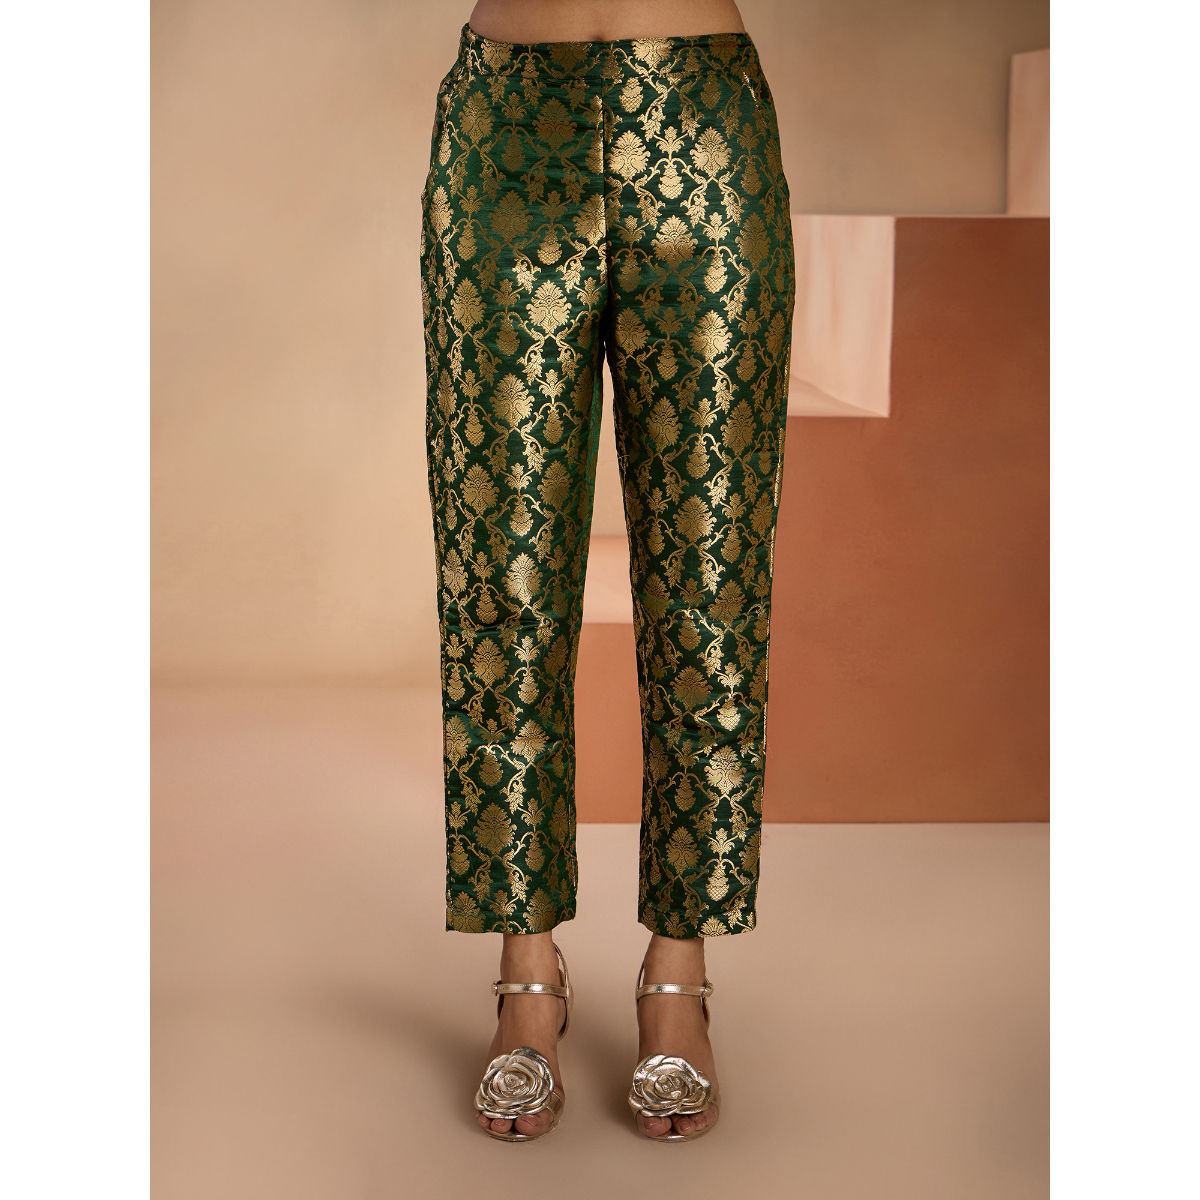 Brocade Lapel Collared Shirt With Pants Festive Co-ord Set | ADFY-ET-113 |  Cilory.com